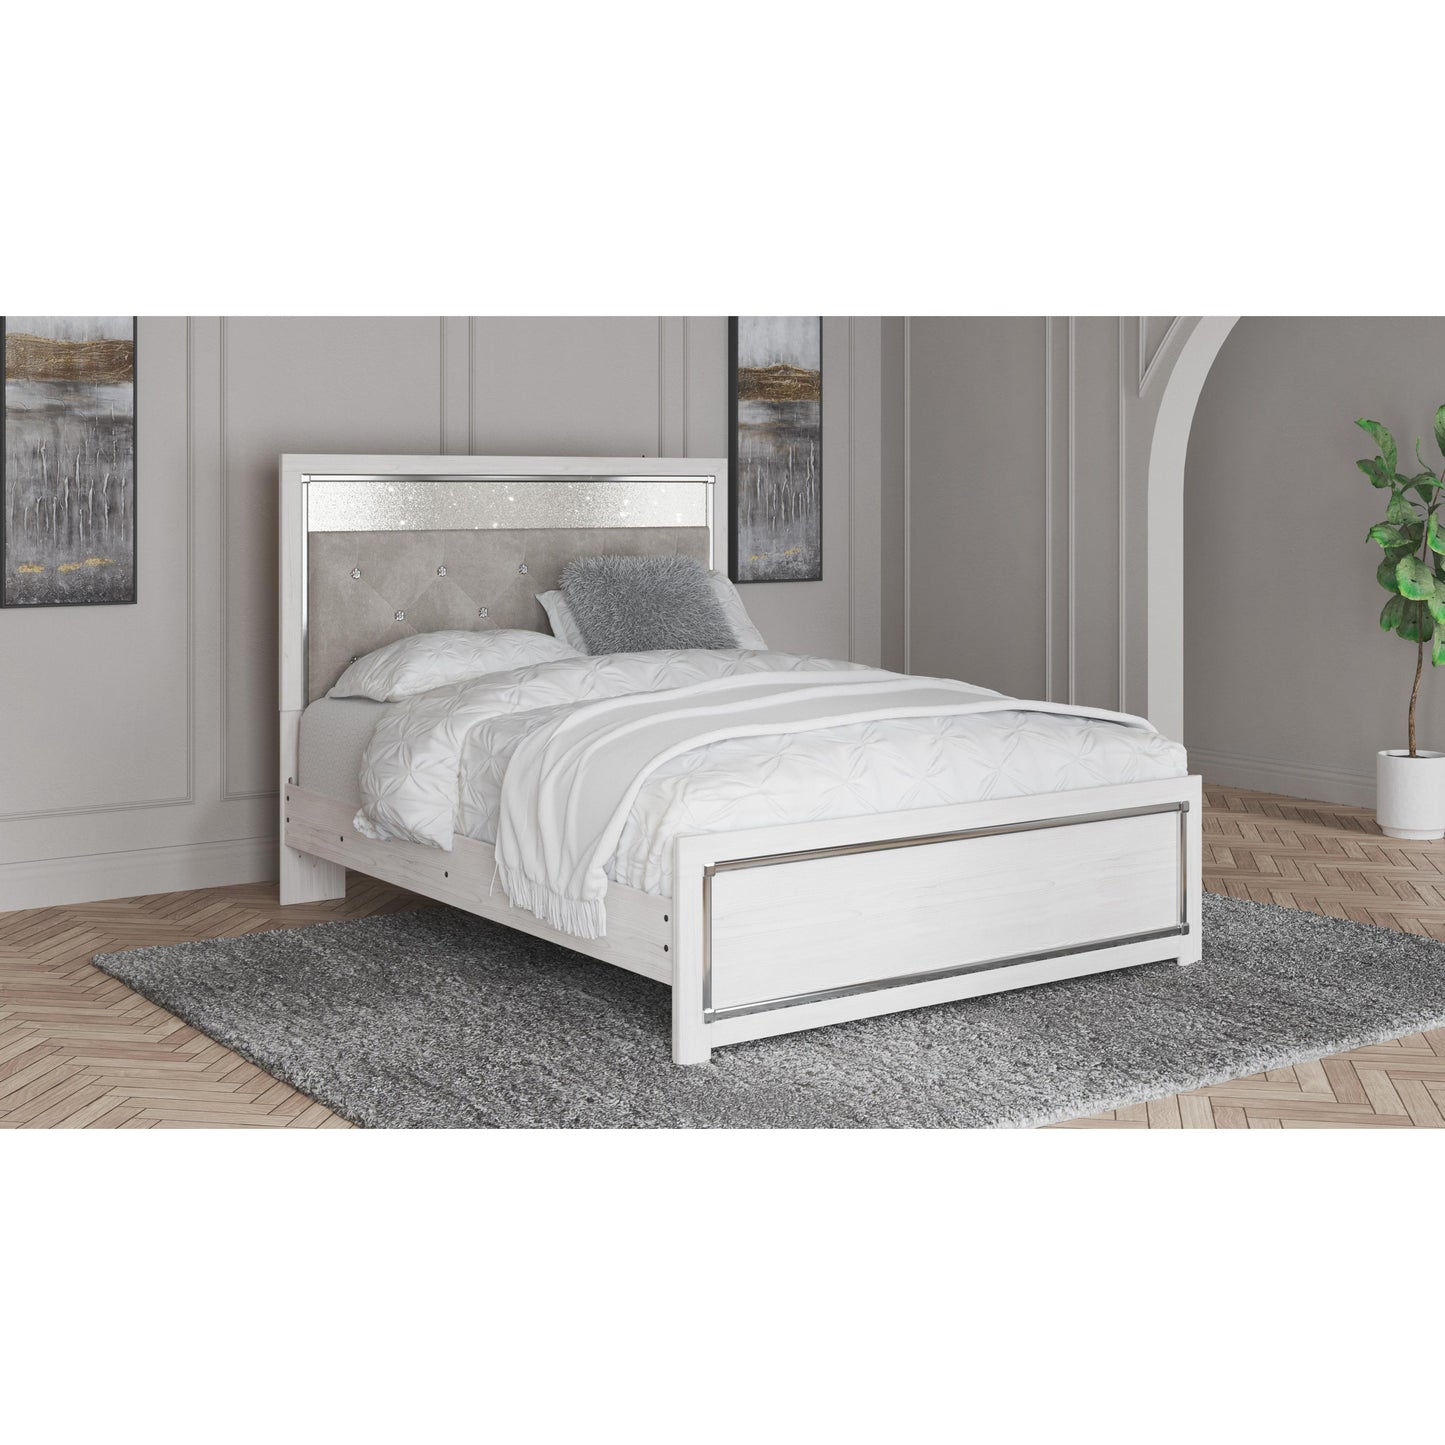 Signature Design by Ashley Altyra B2640 6 pc Queen Panel Bedroom Set IMAGE 2